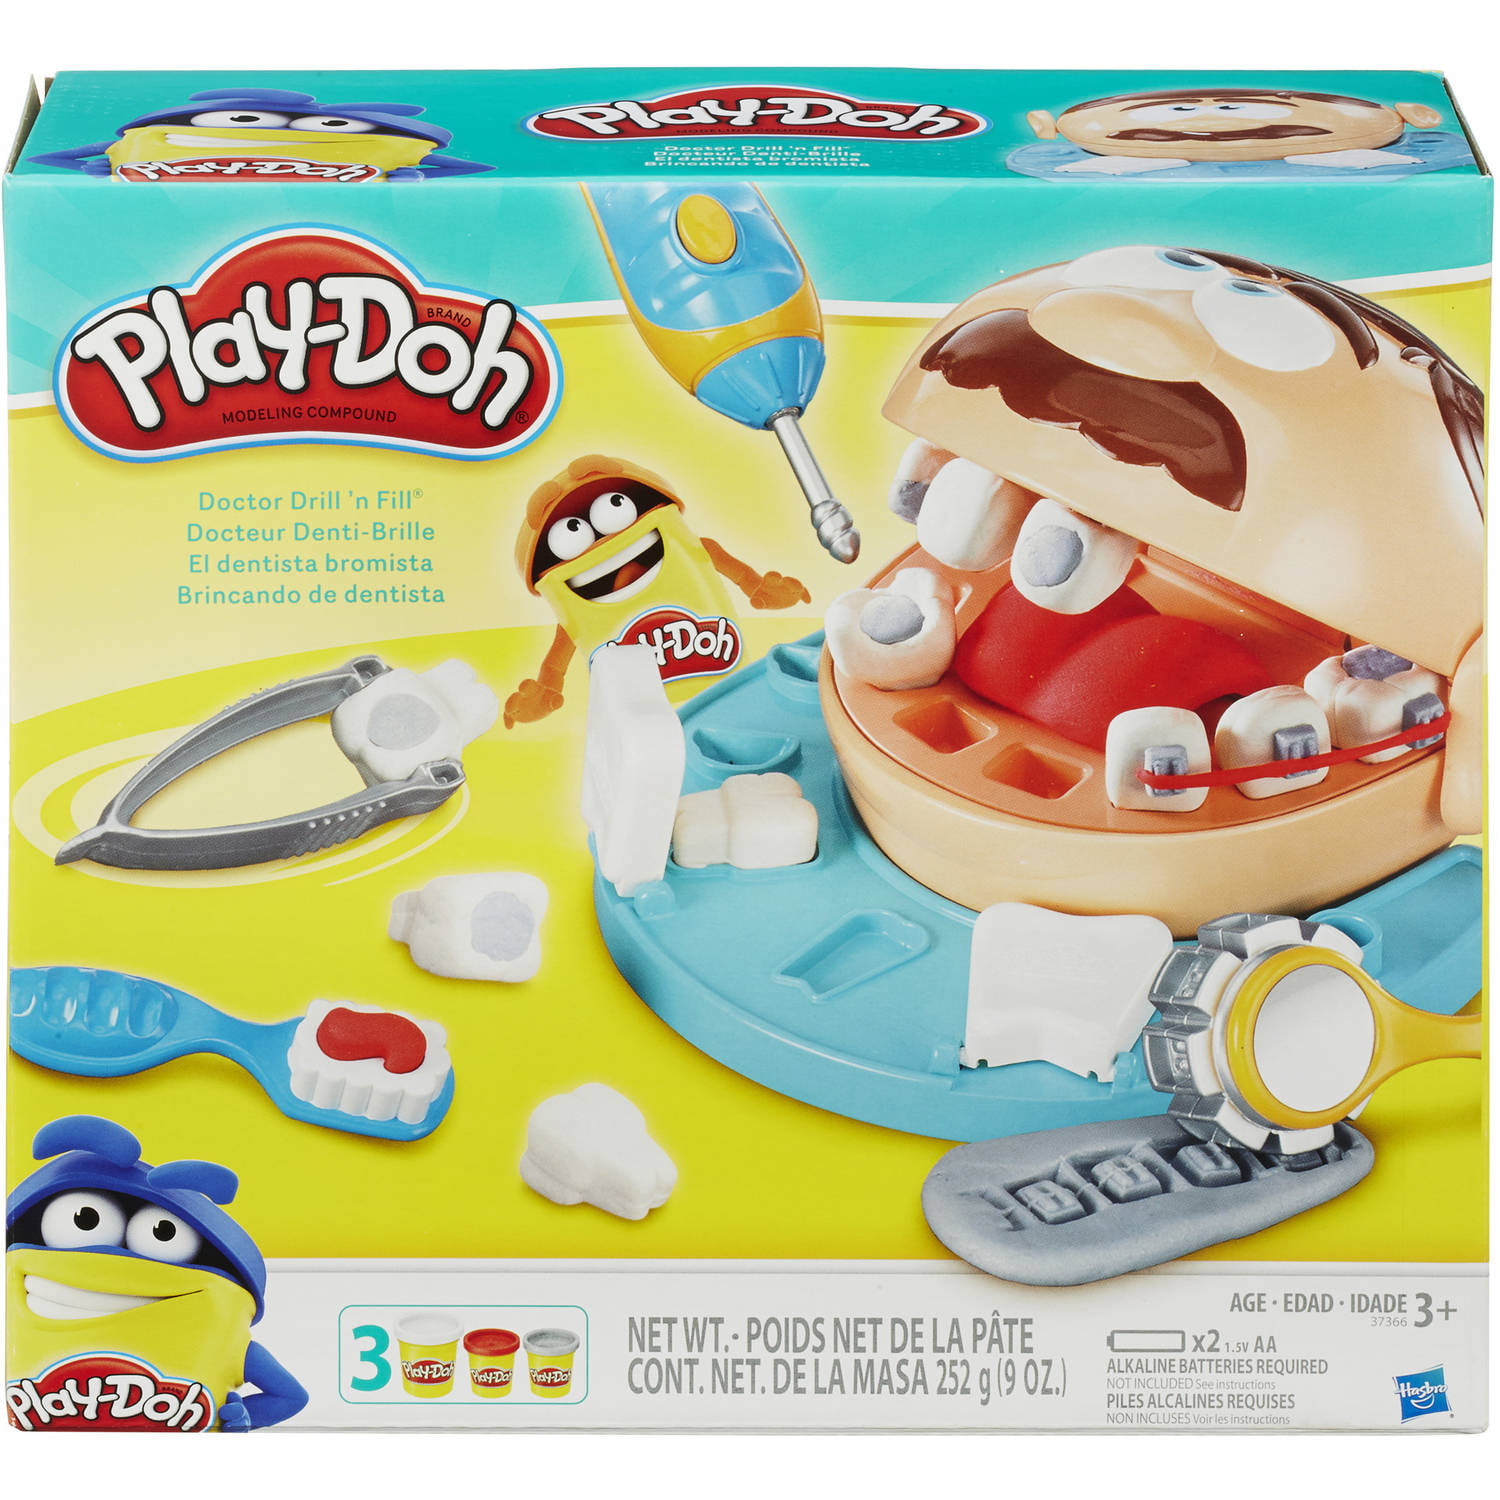 Play-Doh Mini Doctor Drill 'n Fill Dentist Playset 4 Oz With Tools for sale online